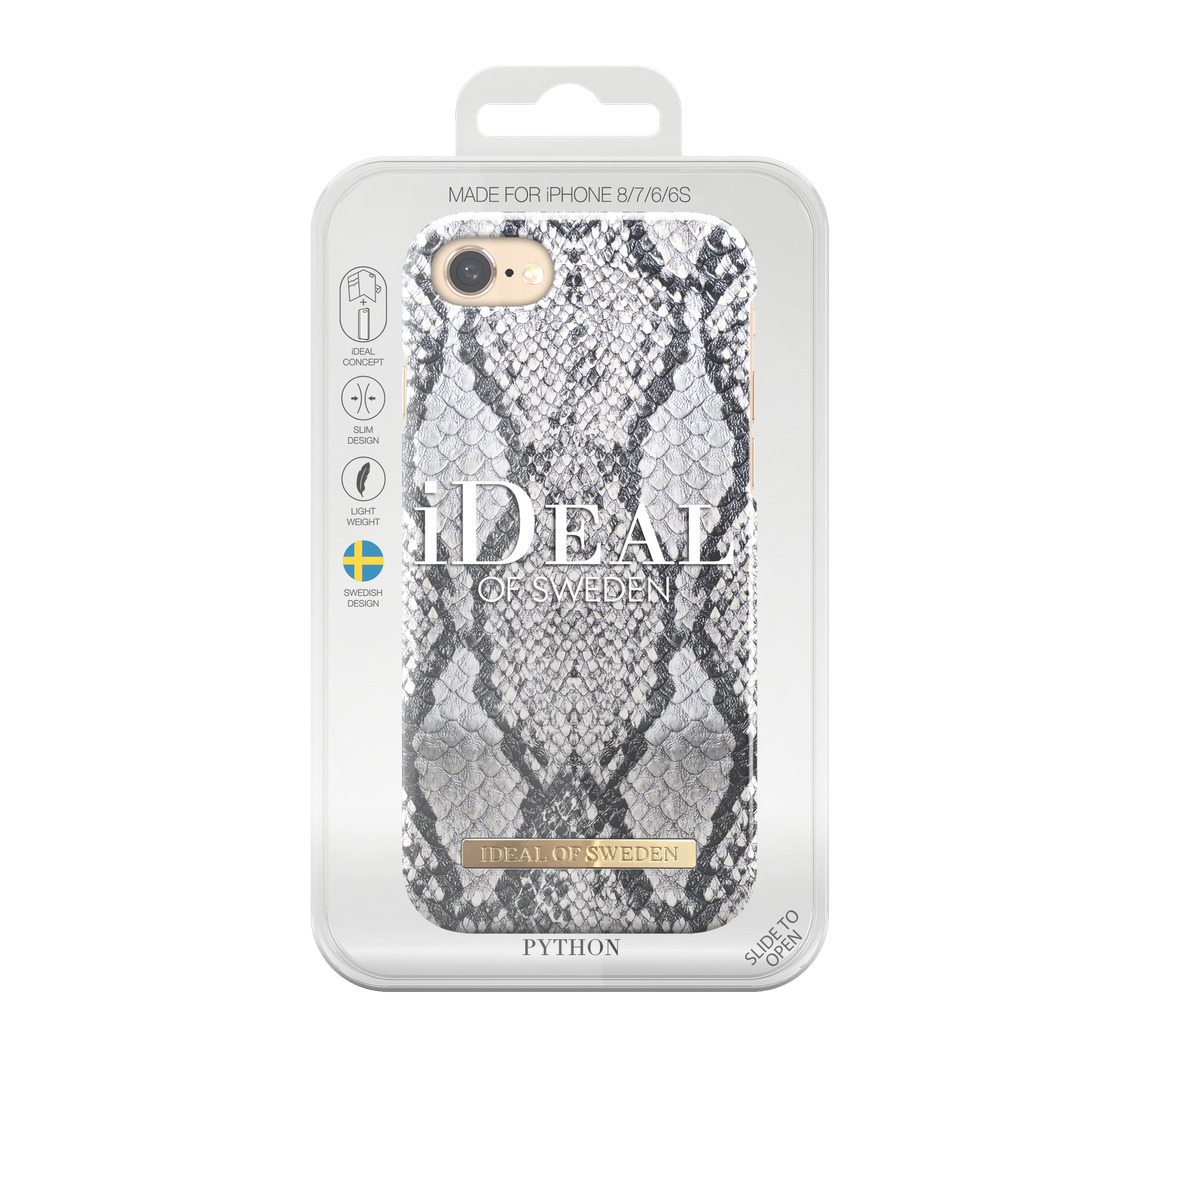 iPhone 6, OF IDEAL Backcover, 8, Python 7, iPhone SWEDEN iPhone Fashion, Apple,